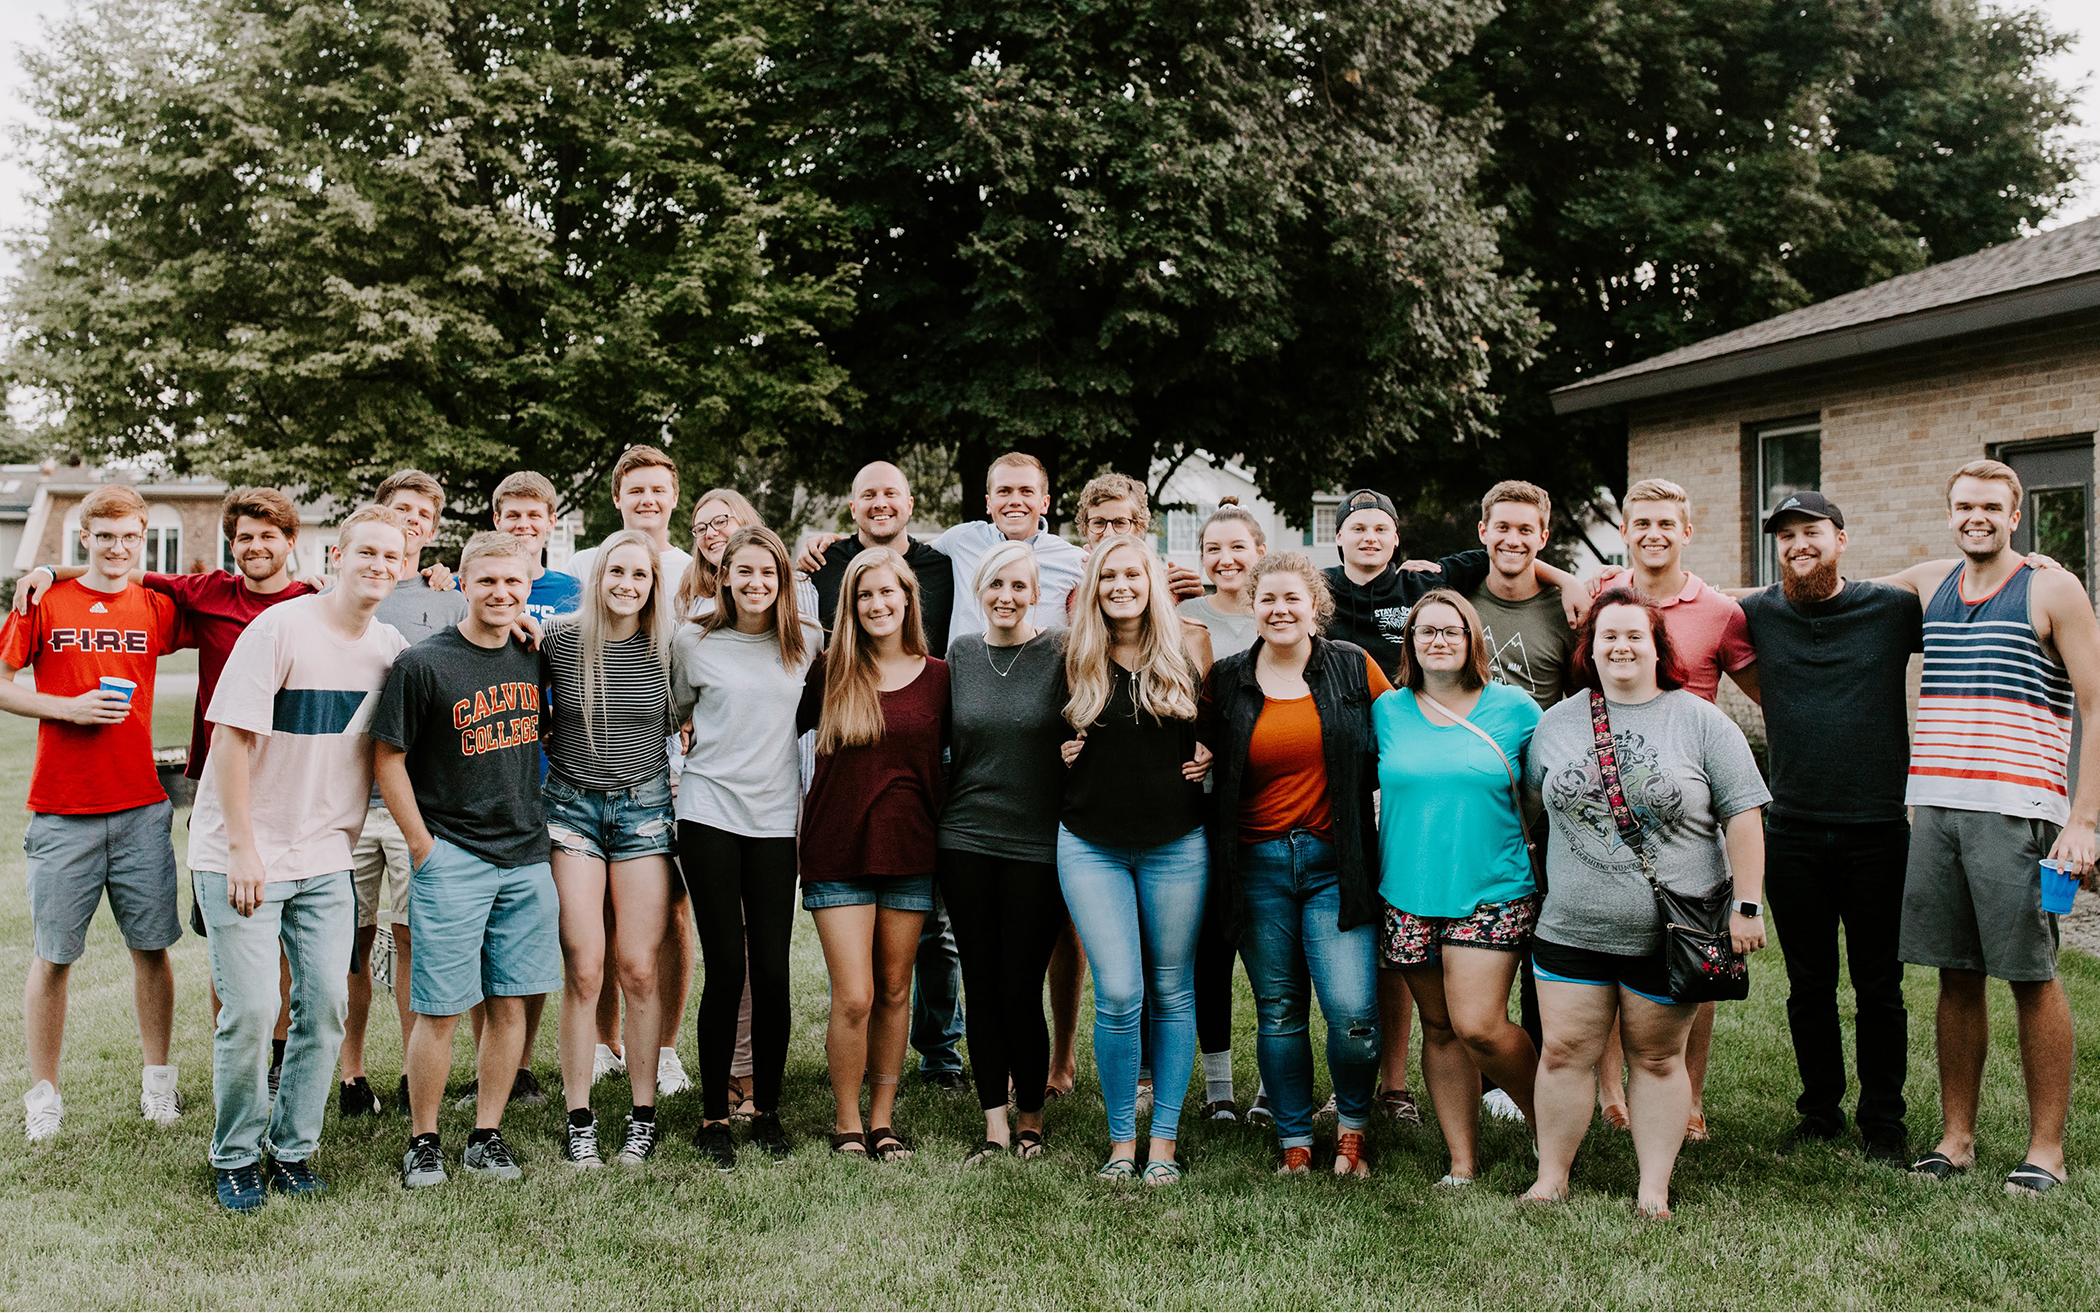 New Young Adults Group ‘Rooted’ in Christian Connection 